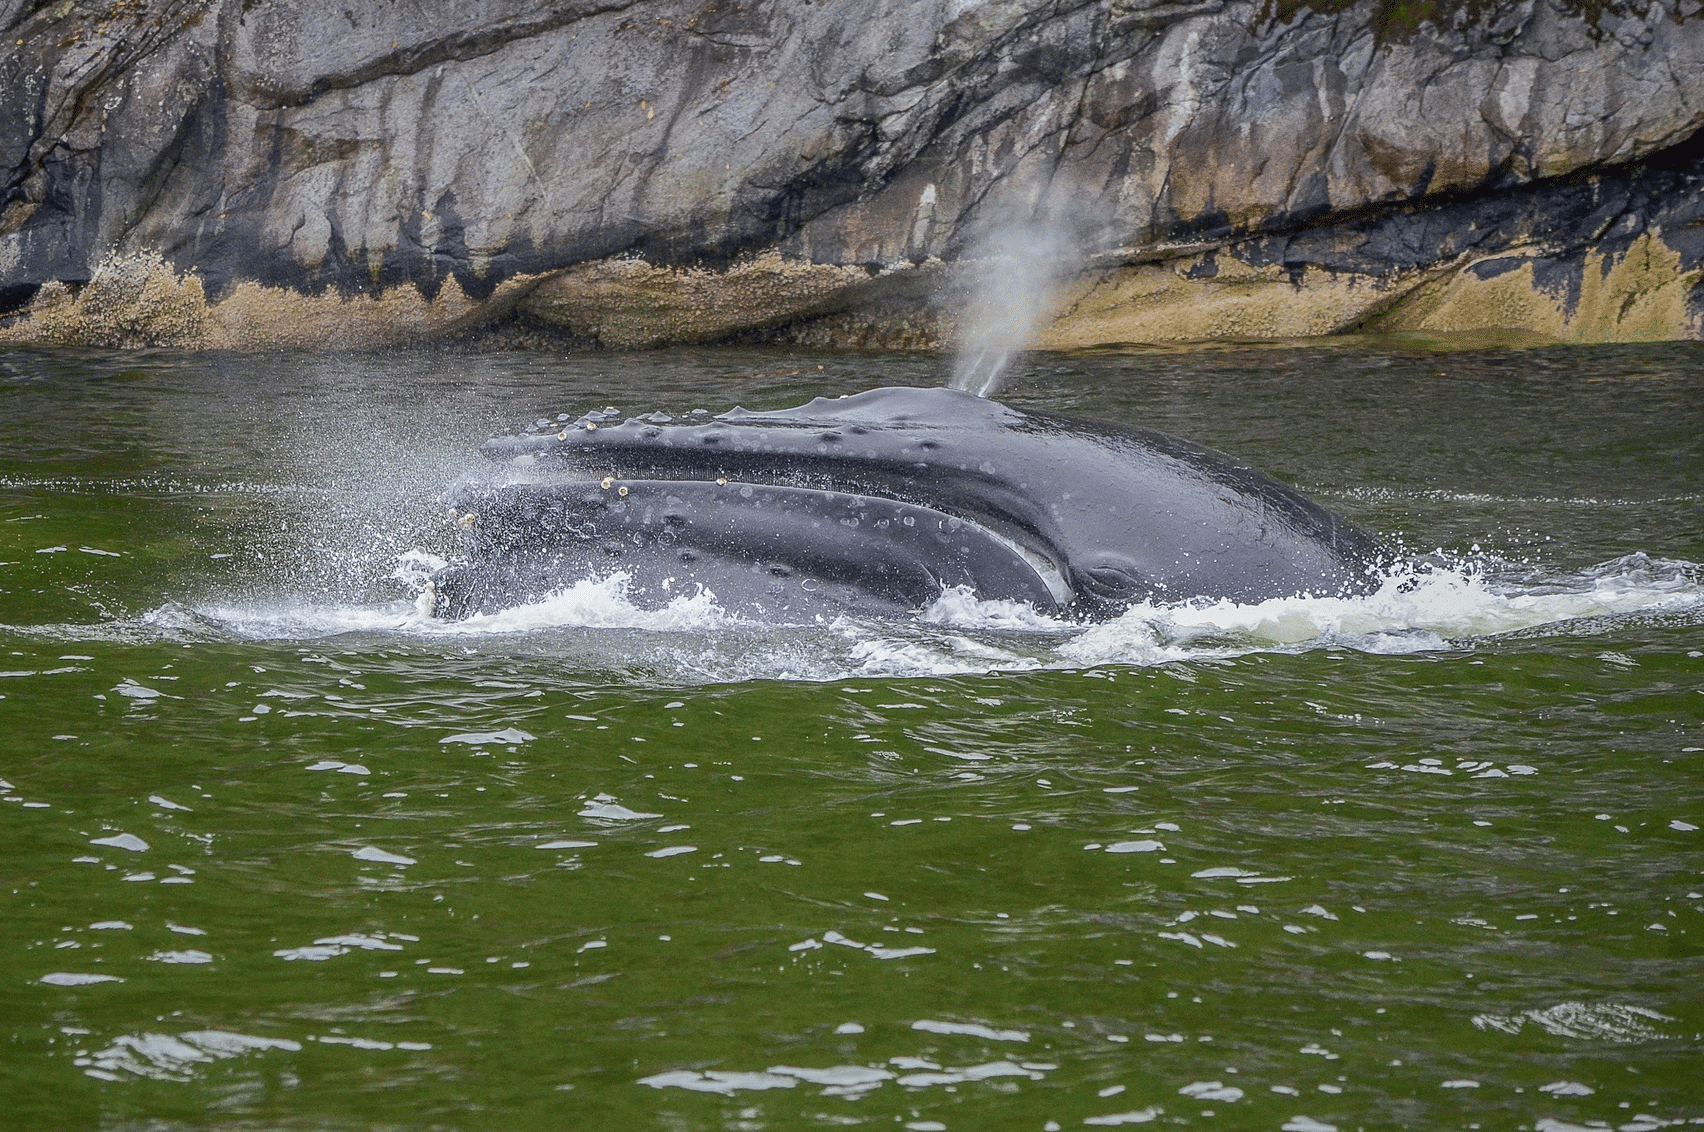 A whale's head emerging from green water